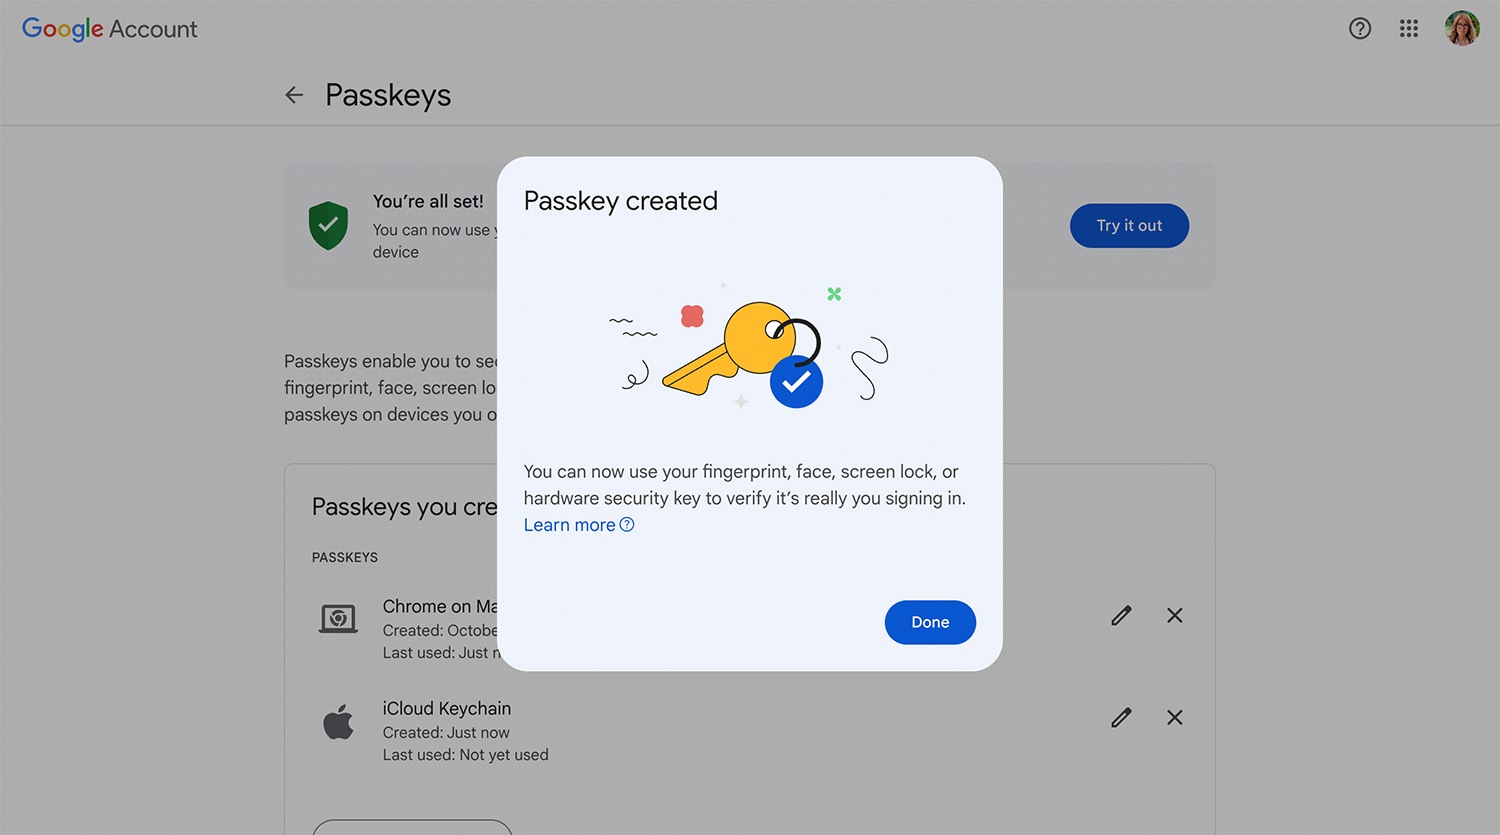 A passkey for a Google account on a smartphone successfully created